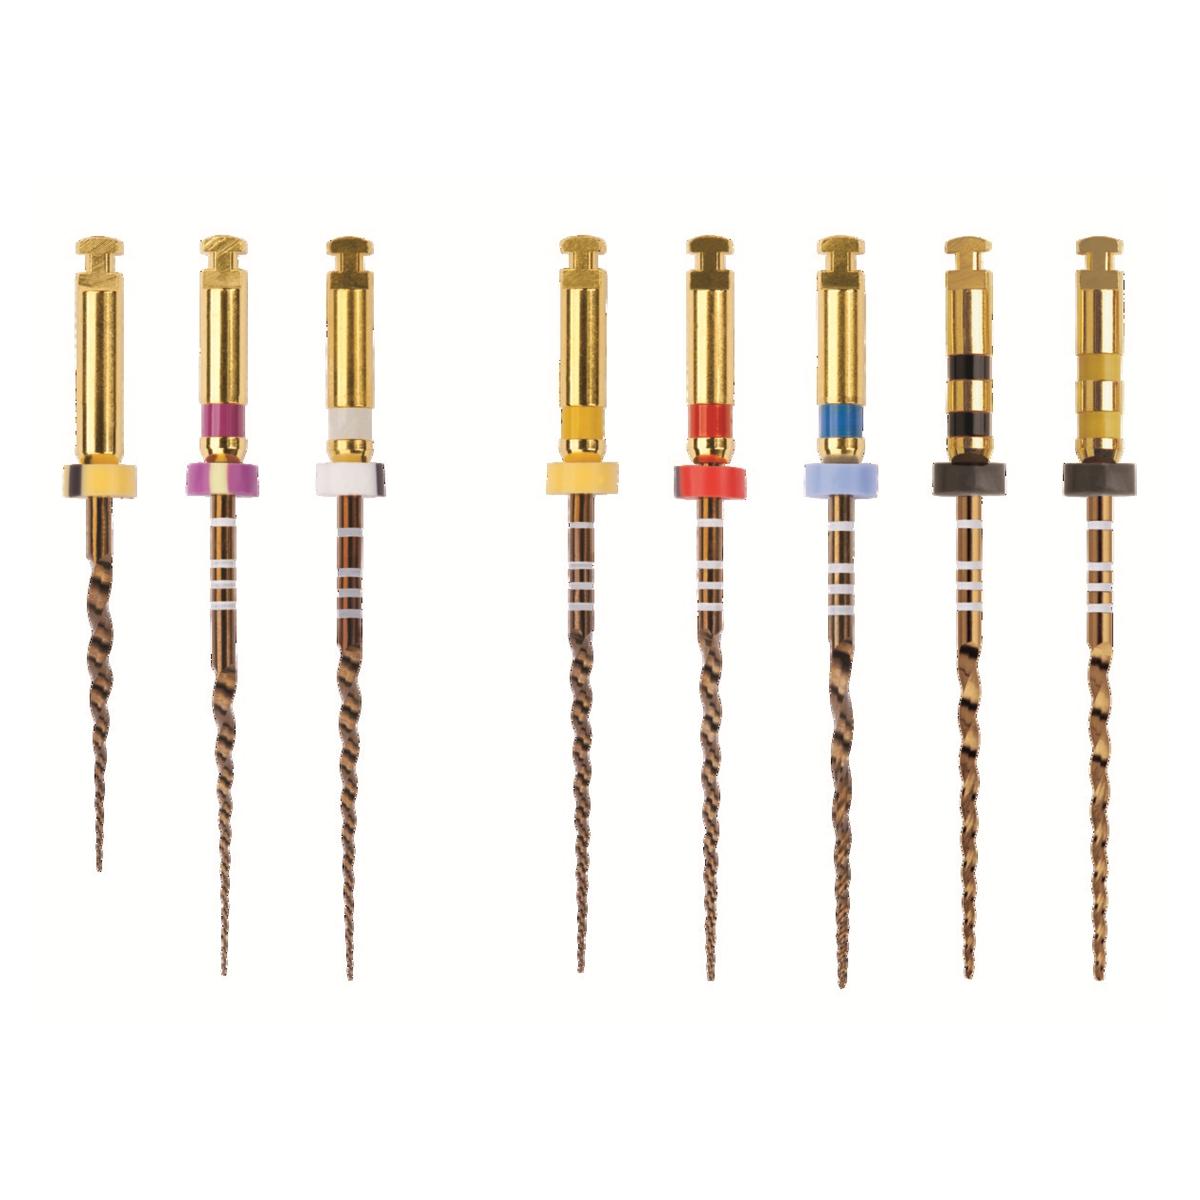 PRO-TAPER GOLD STERILES 25MM S2 (6) MAILLEFER